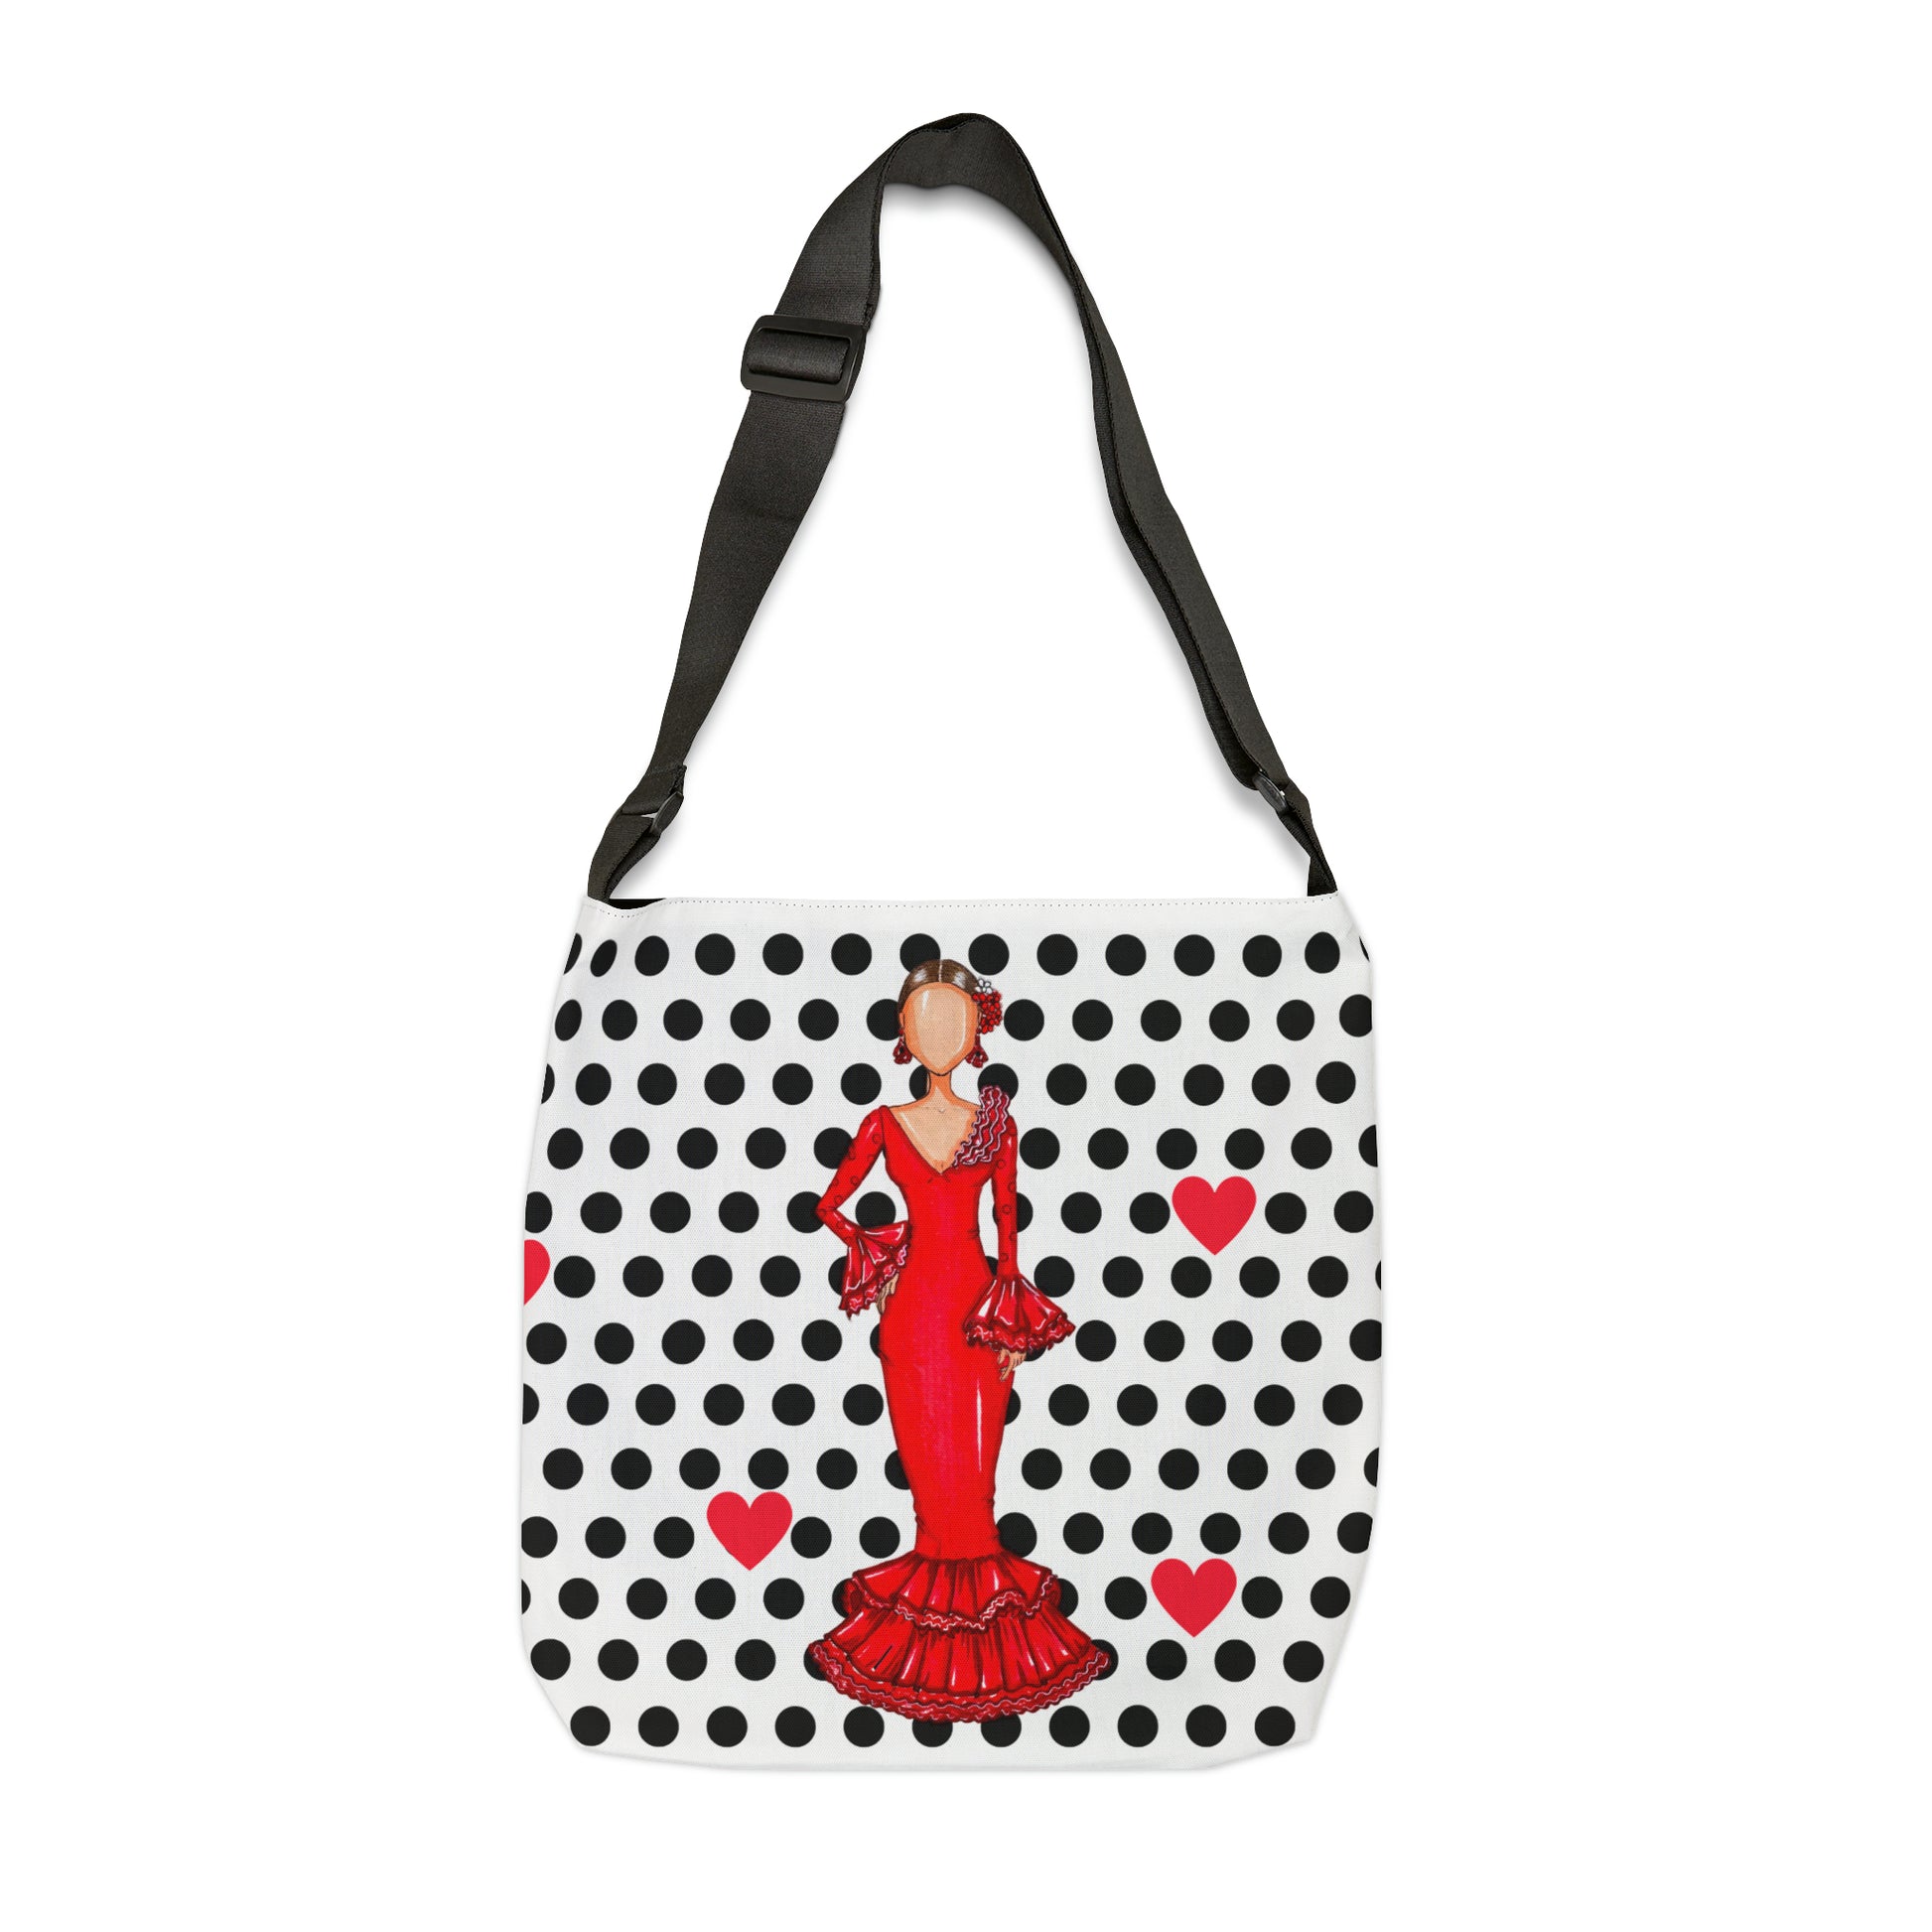 Flamenco Dancer Tote Bag with zip, red dress and red hearts on a black polka dot design. - IllustrArte